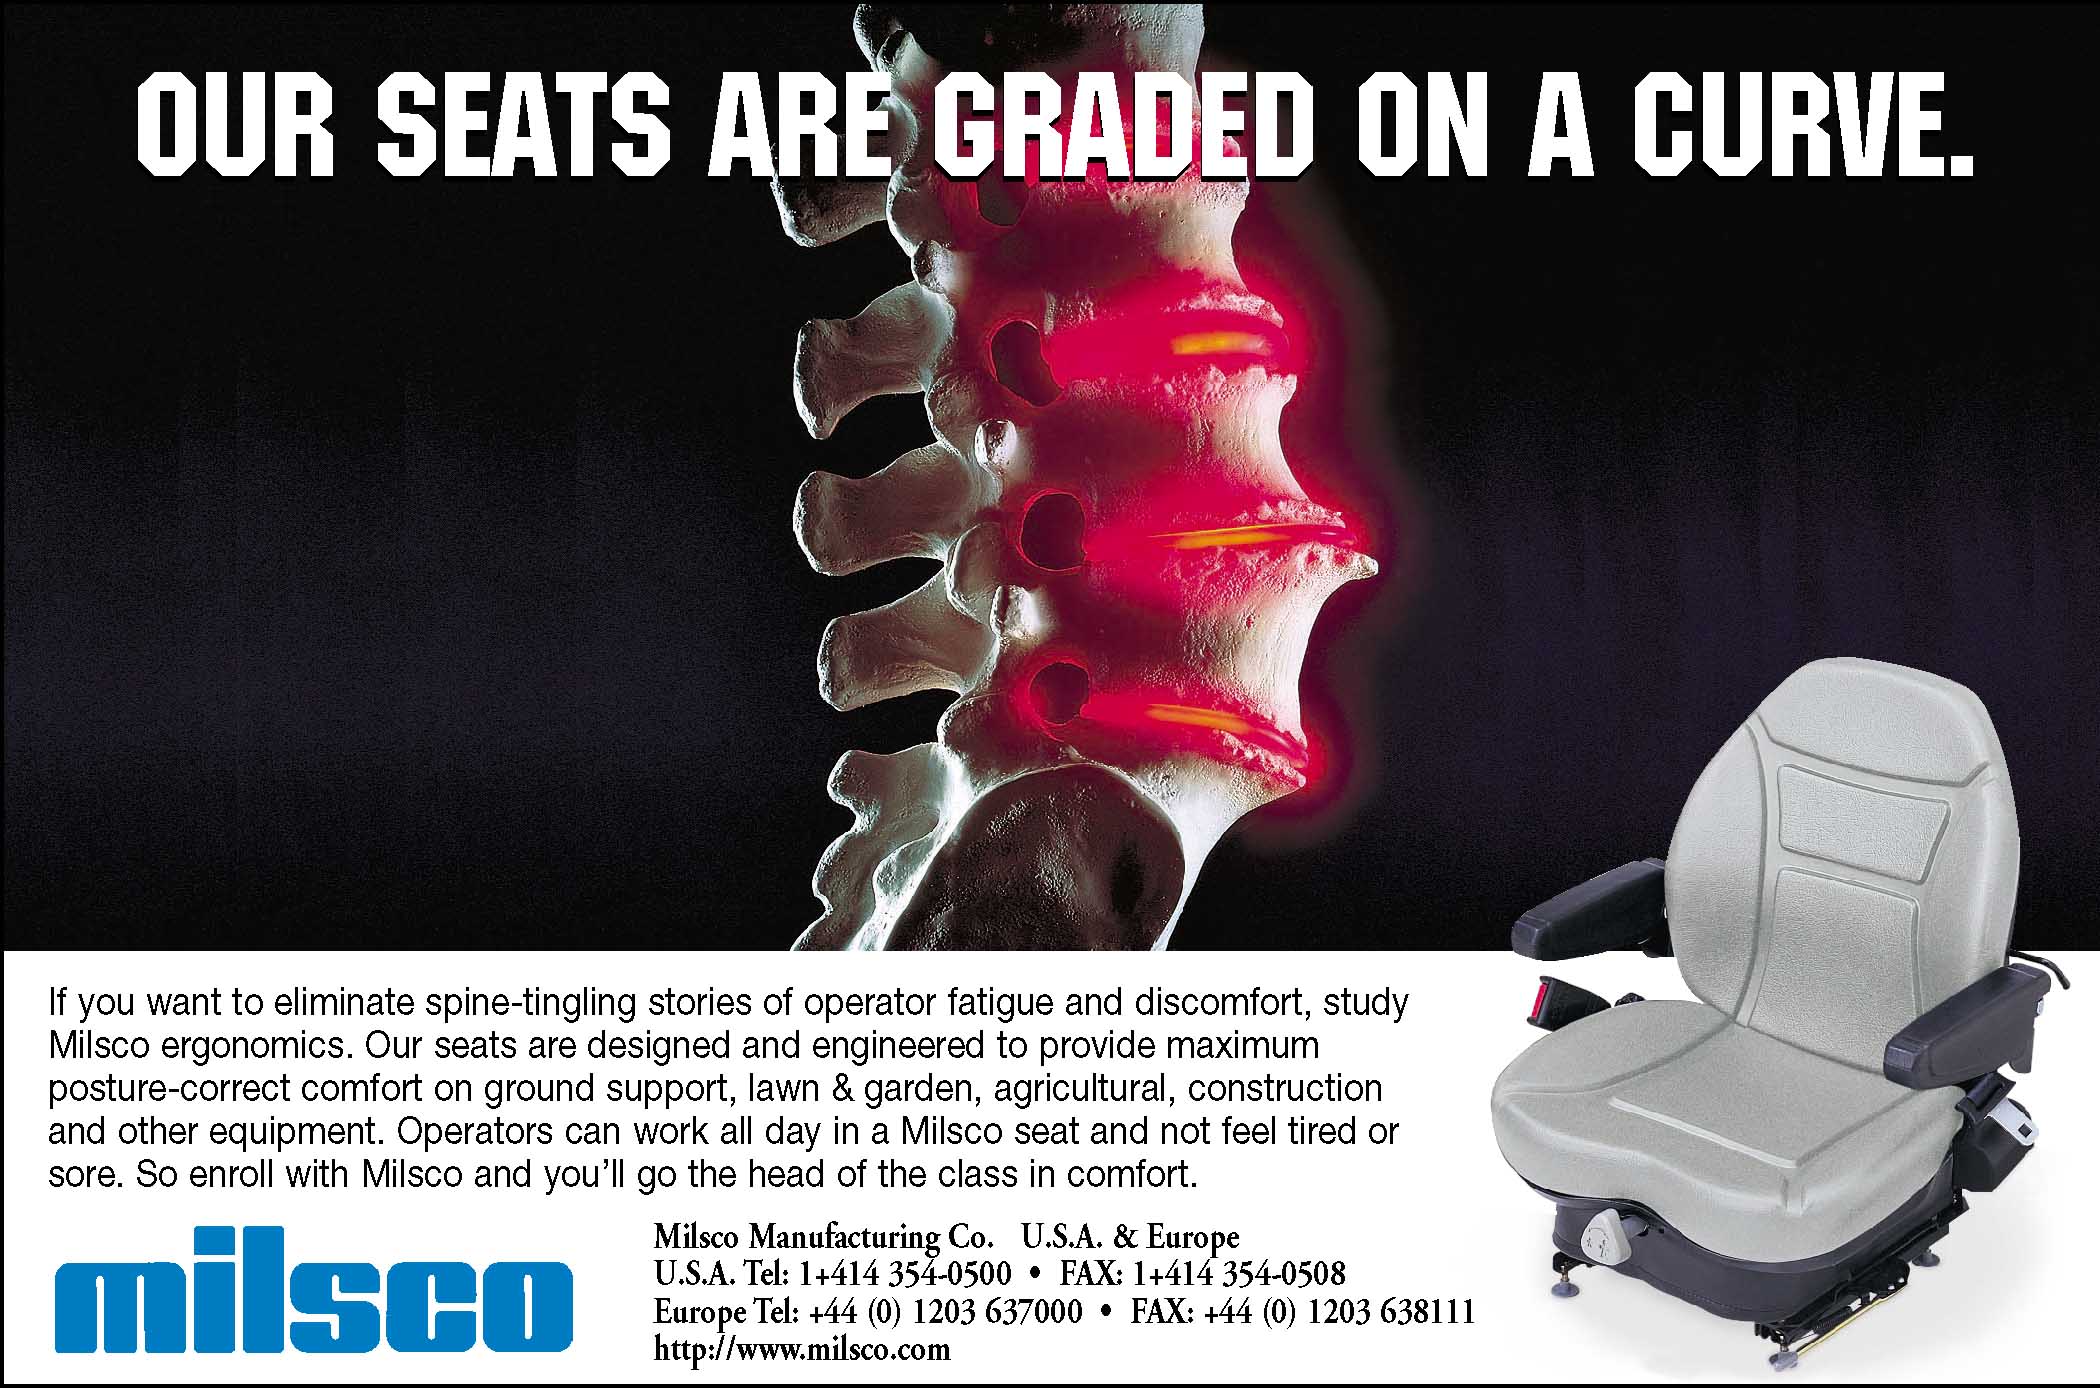 Graded On A Curve Ad for Milsco Seats